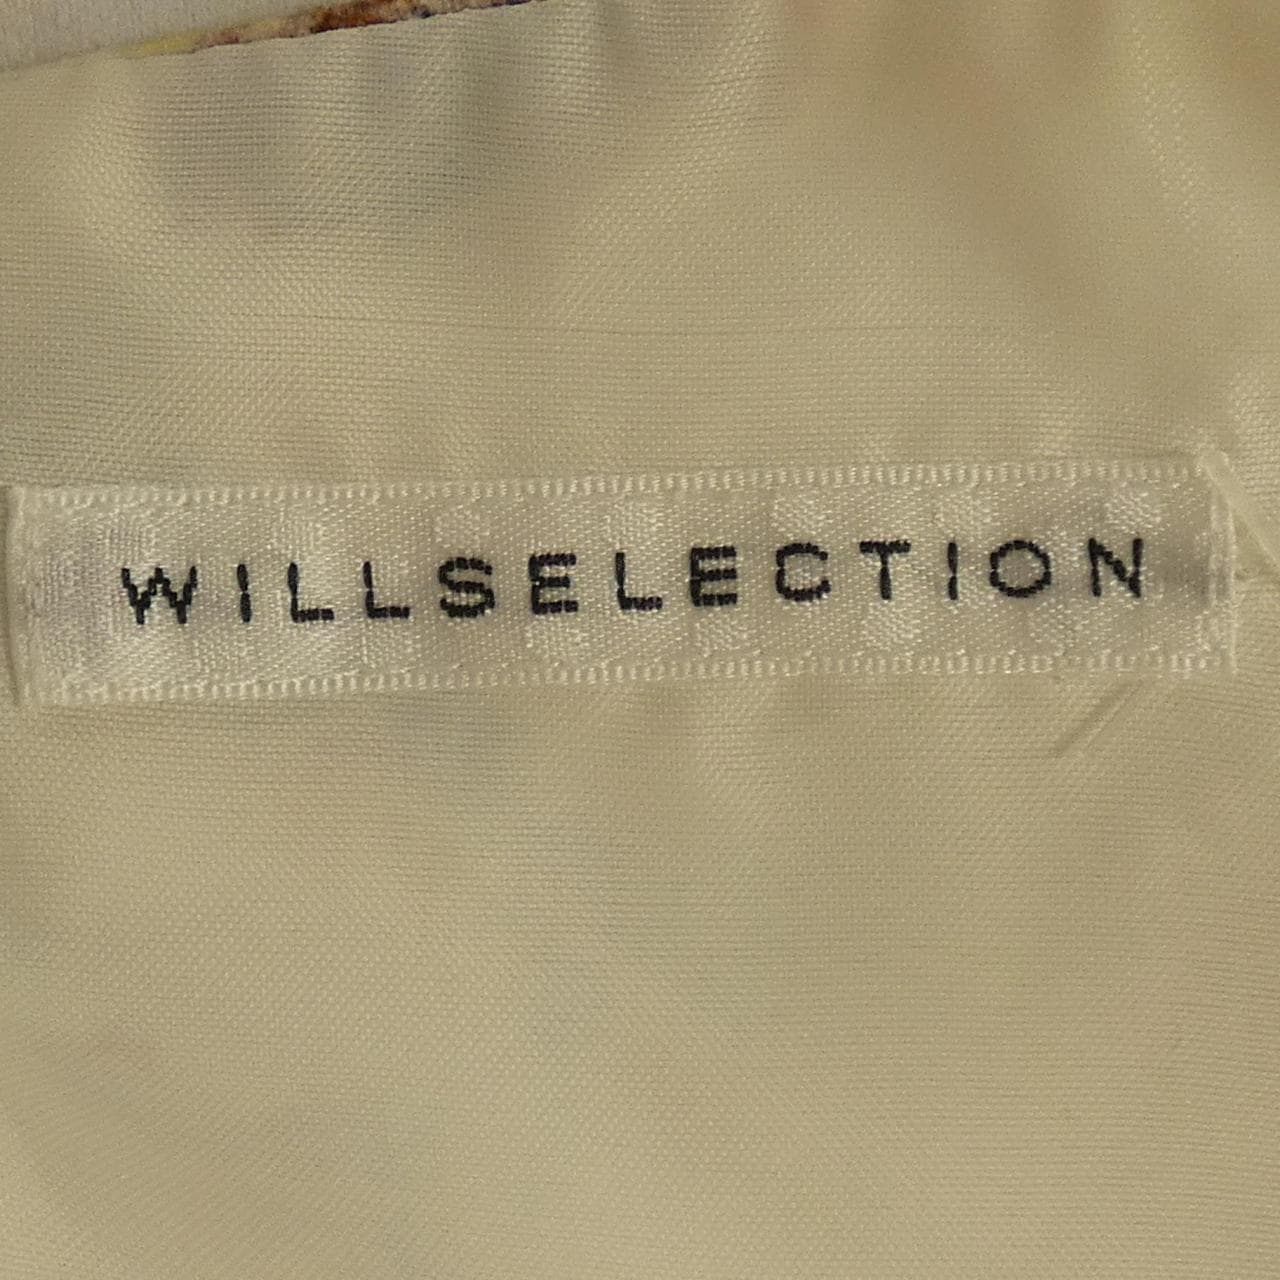 WILL SELECTION ワンピース